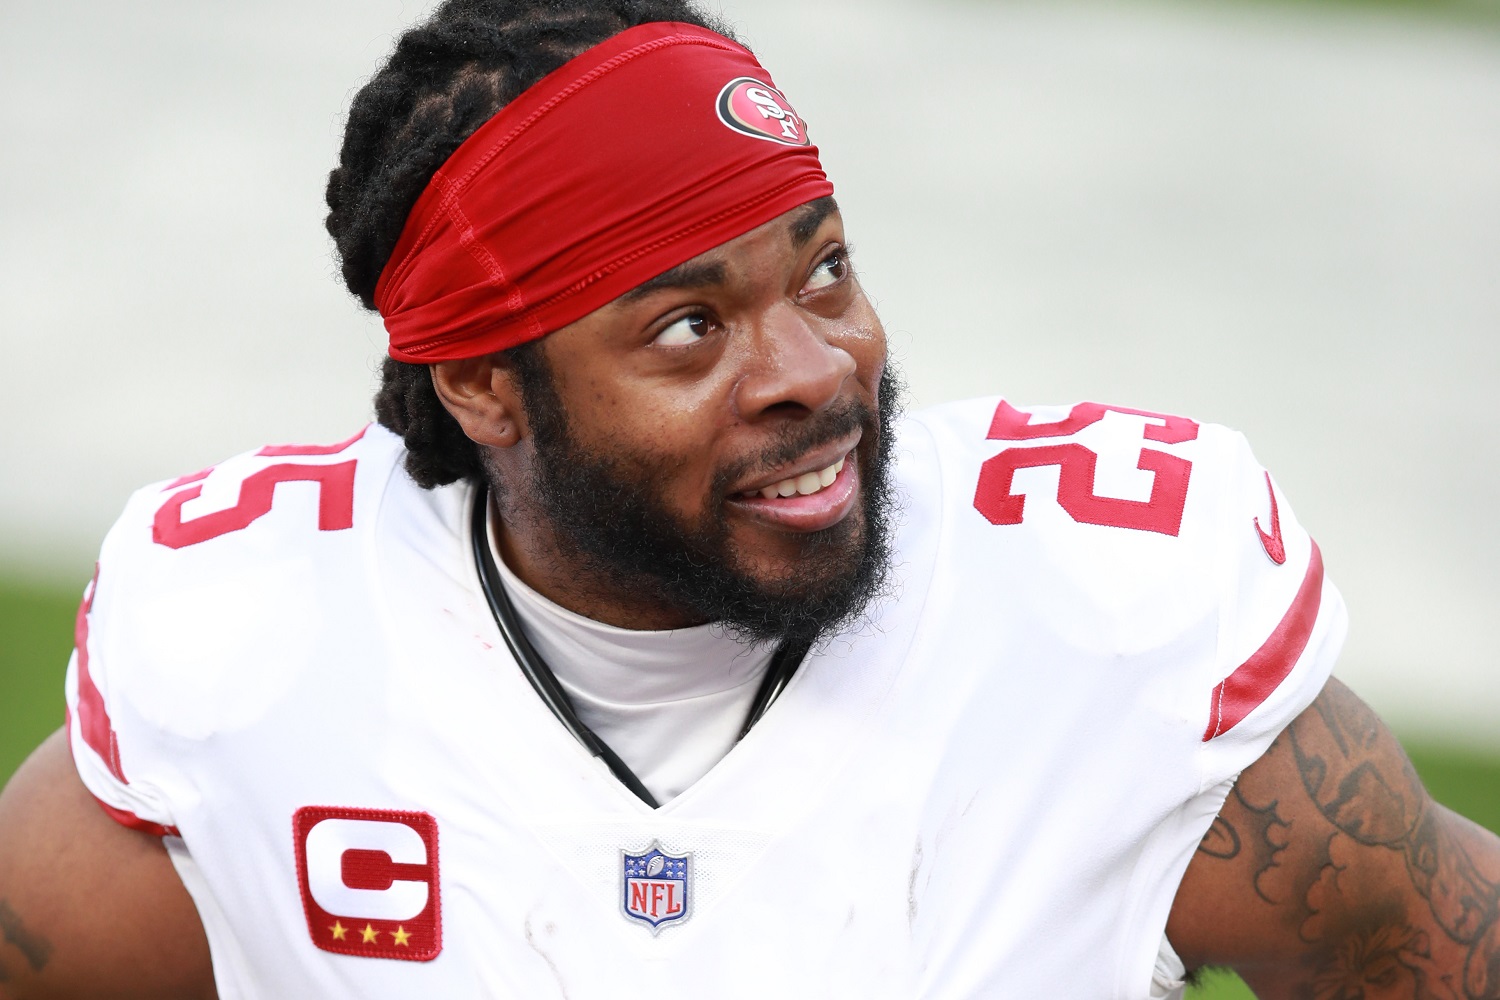 Richard Sherman of the San Francisco 49ers speaks to a teammate on the bench in the second quarter against the Los Angeles Rams at SoFi Stadium on Nov. 29, 2020.